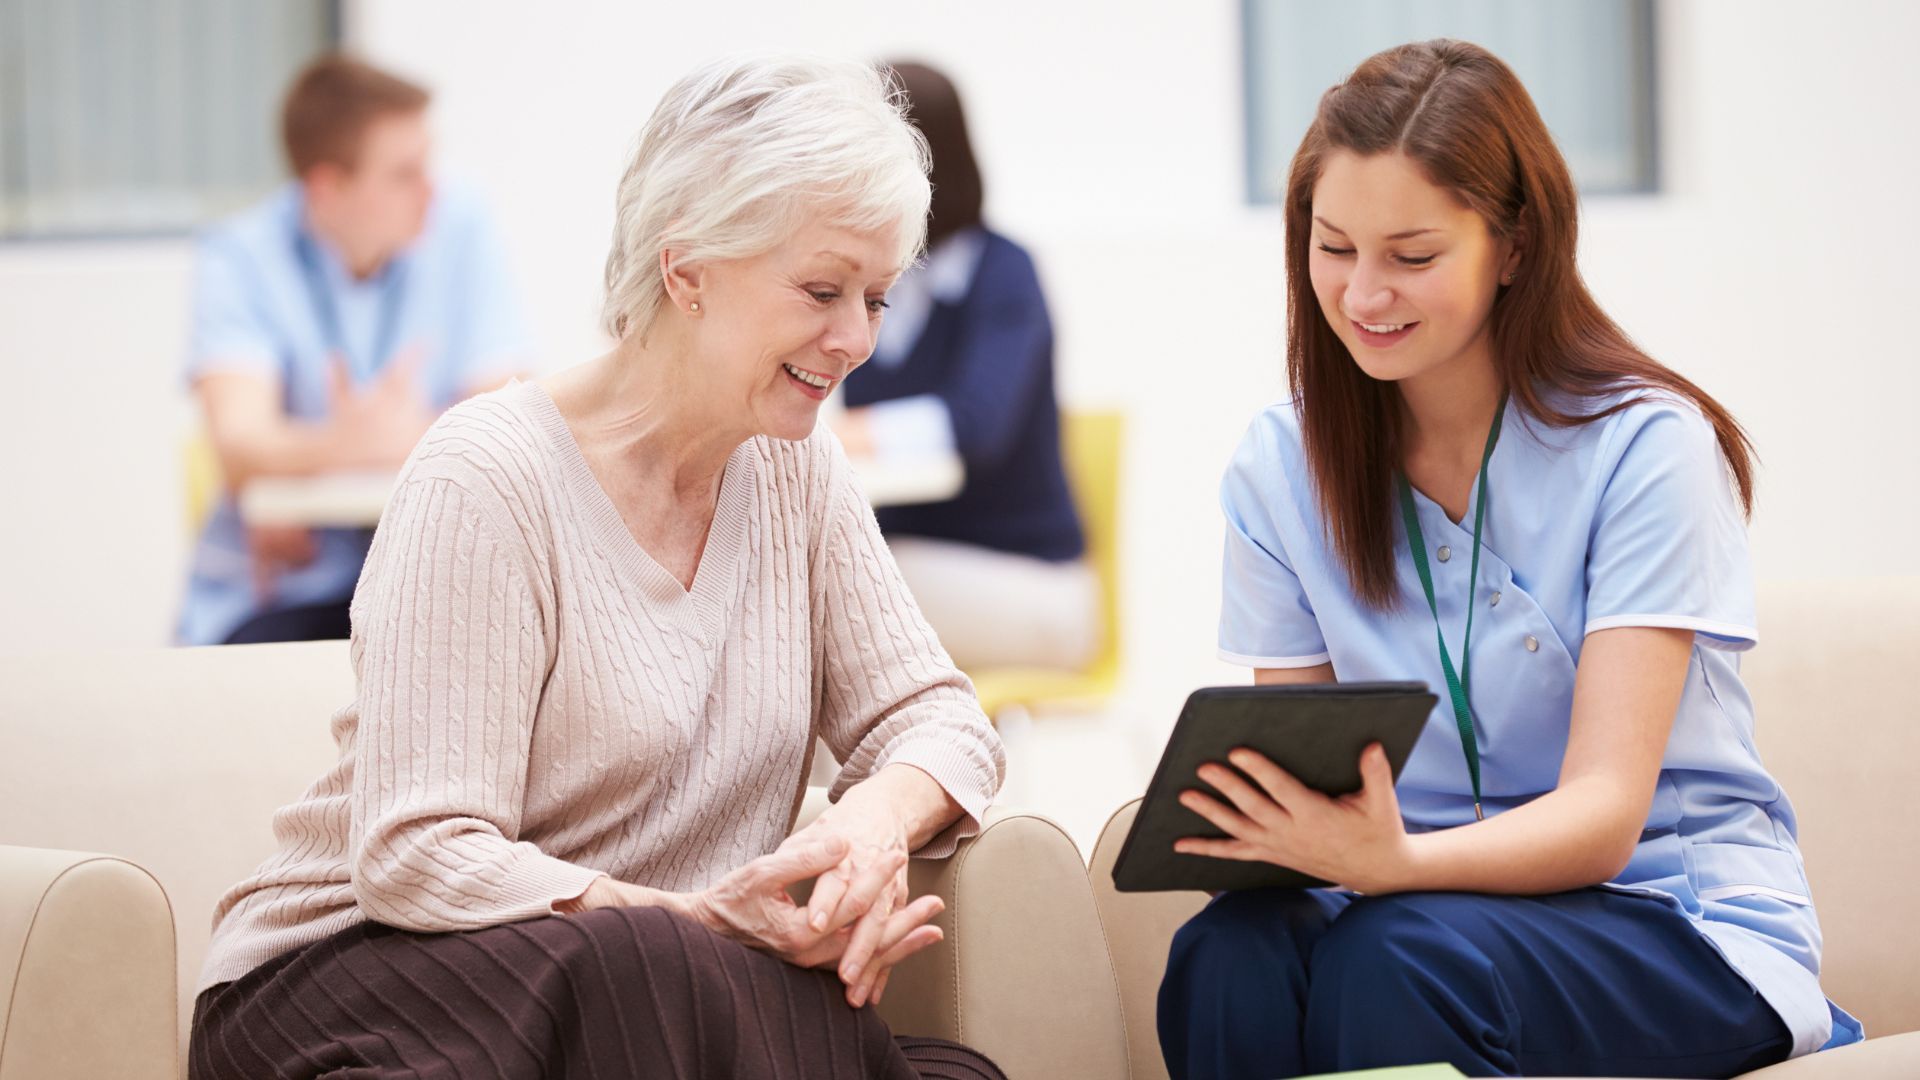 Real-World Usage Reports Show That ONS Guidelines™ Empower Nurses to  Provide Best Patient Care